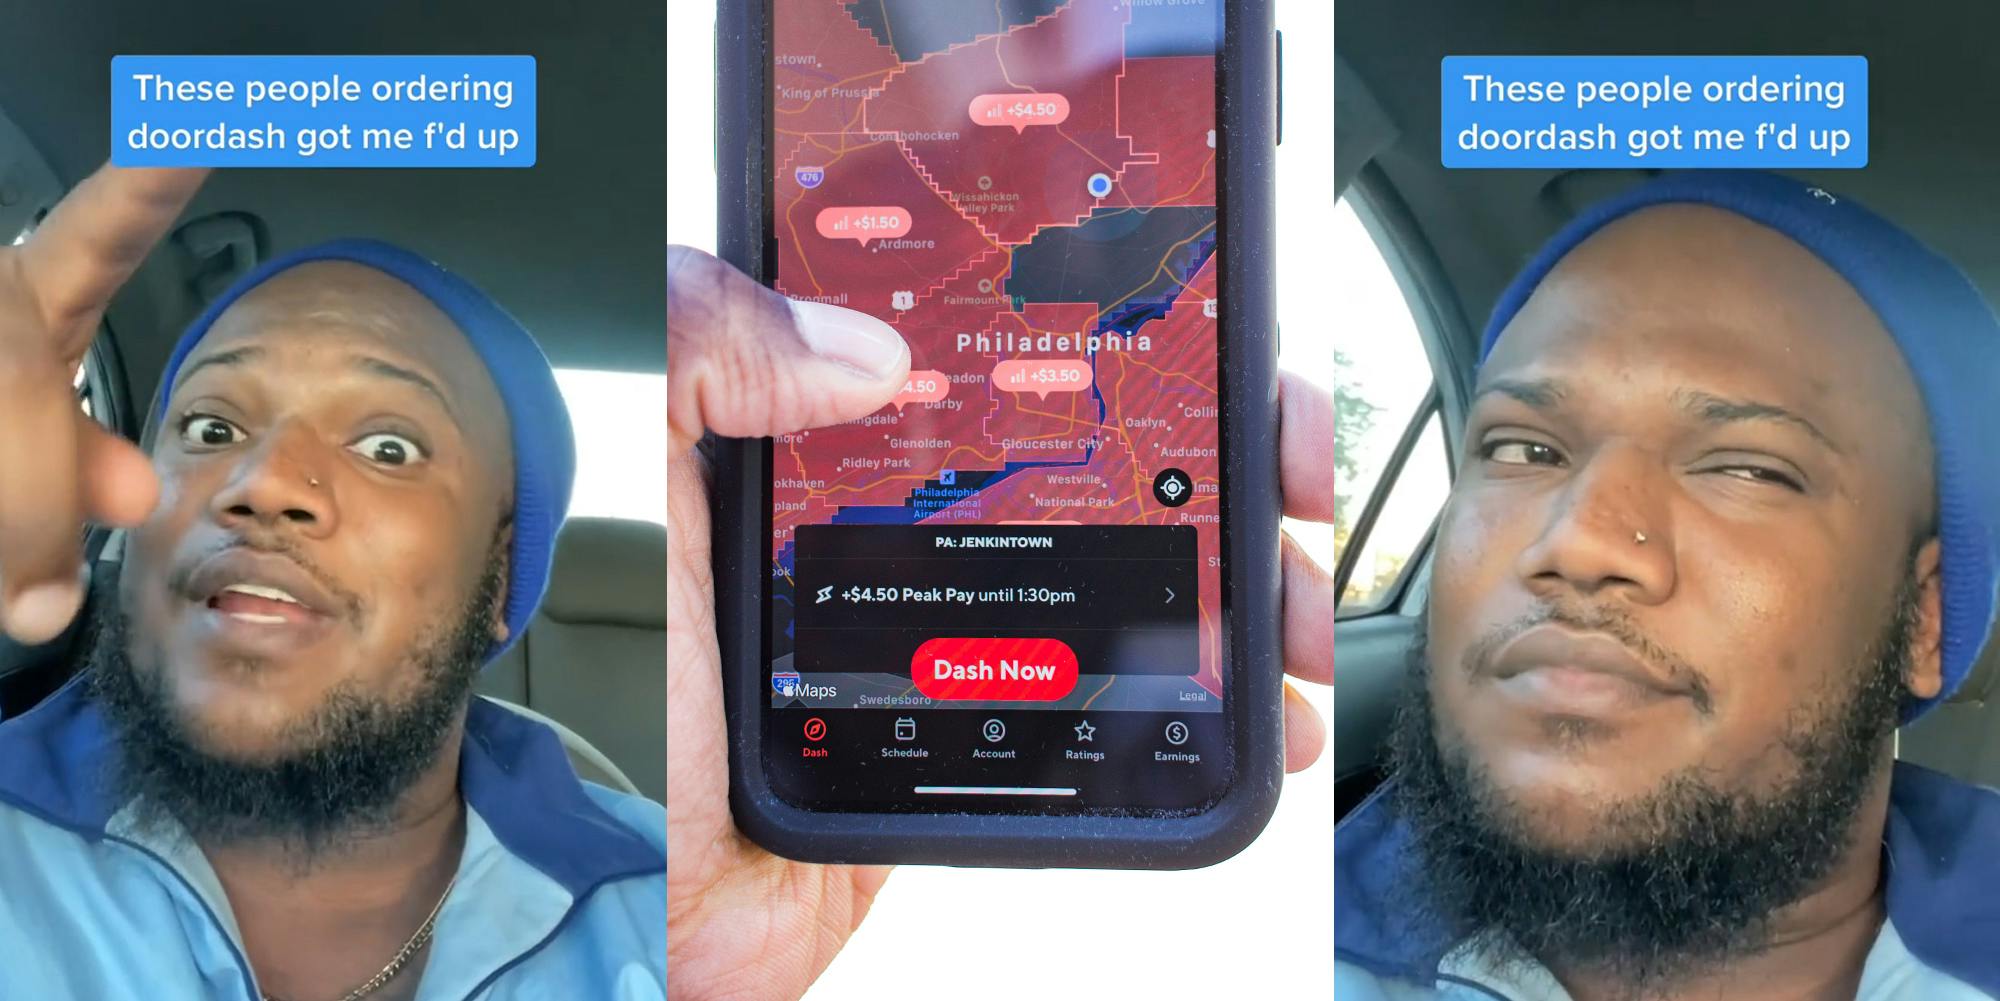 DoorDash employee speaking in car with caption "These people ordering doordash got me f'd up" (l) hand holding phone with Dash Now option on DoorDash app in front of white background (c) DoorDash employee speaking in car with caption "These people ordering doordash got me f'd up" (r)